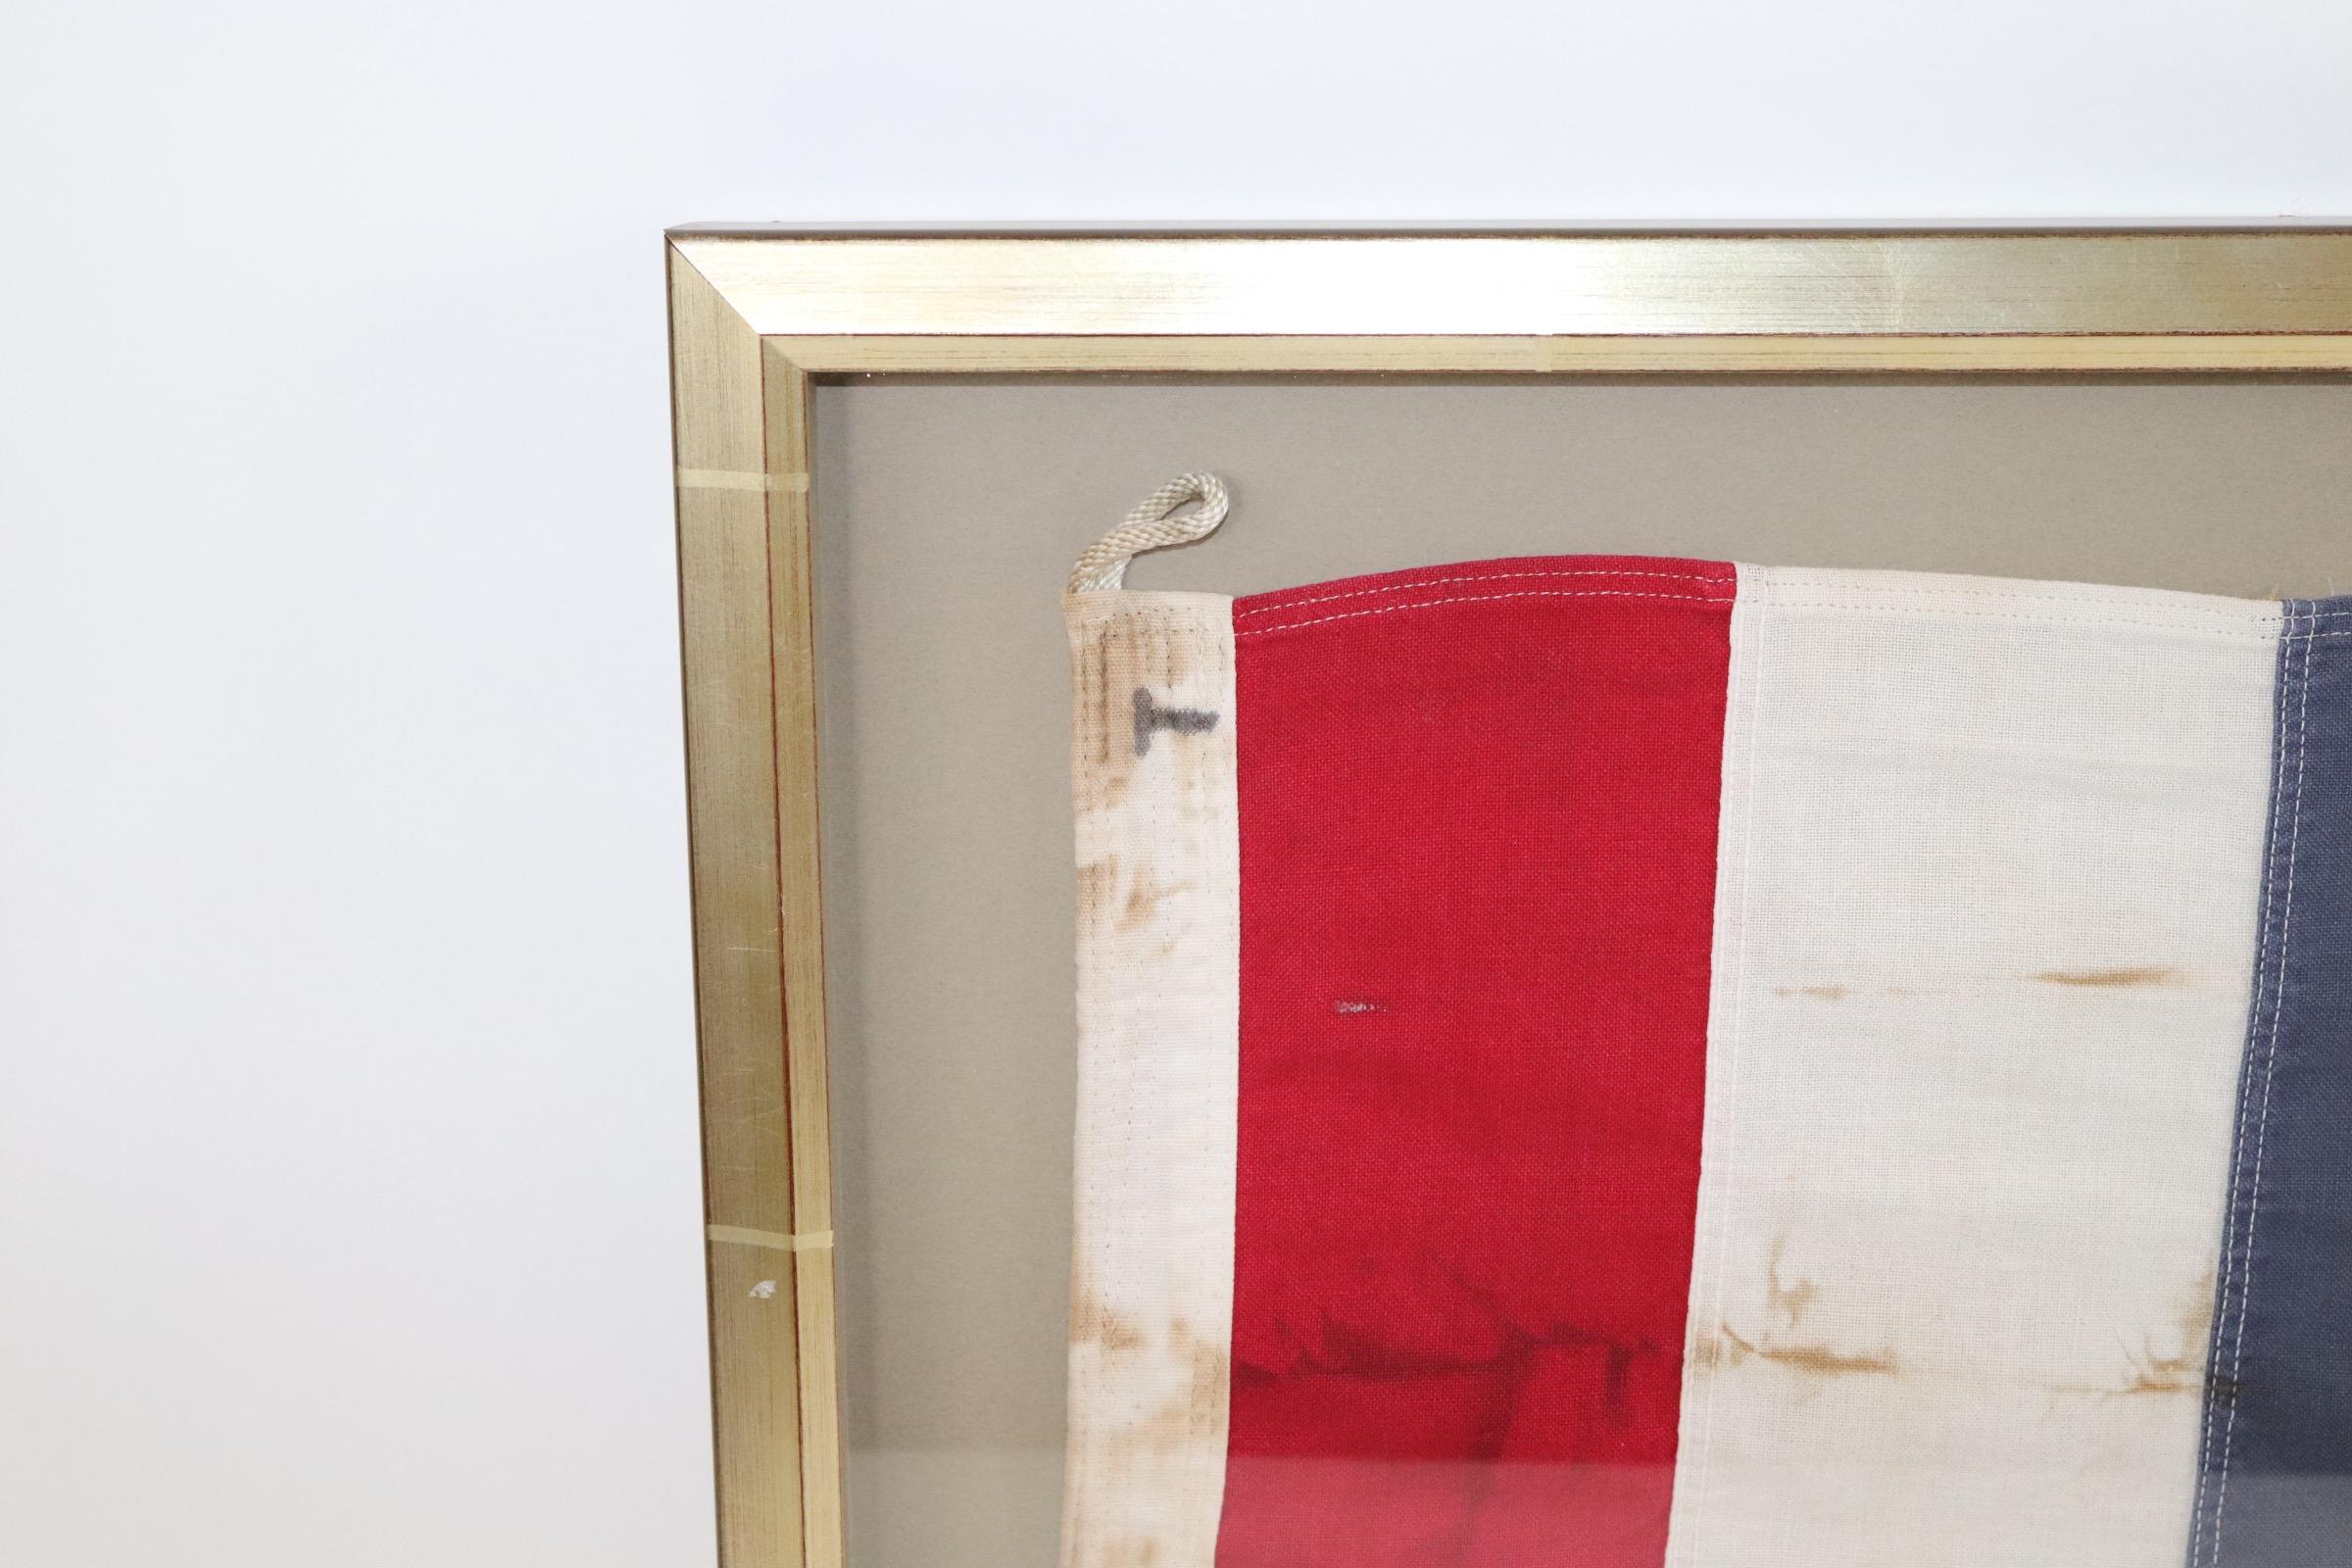 Shadow box framed signal flag with attached rope and wood toggle. Red, white and blue field. Weight is 5 pounds.